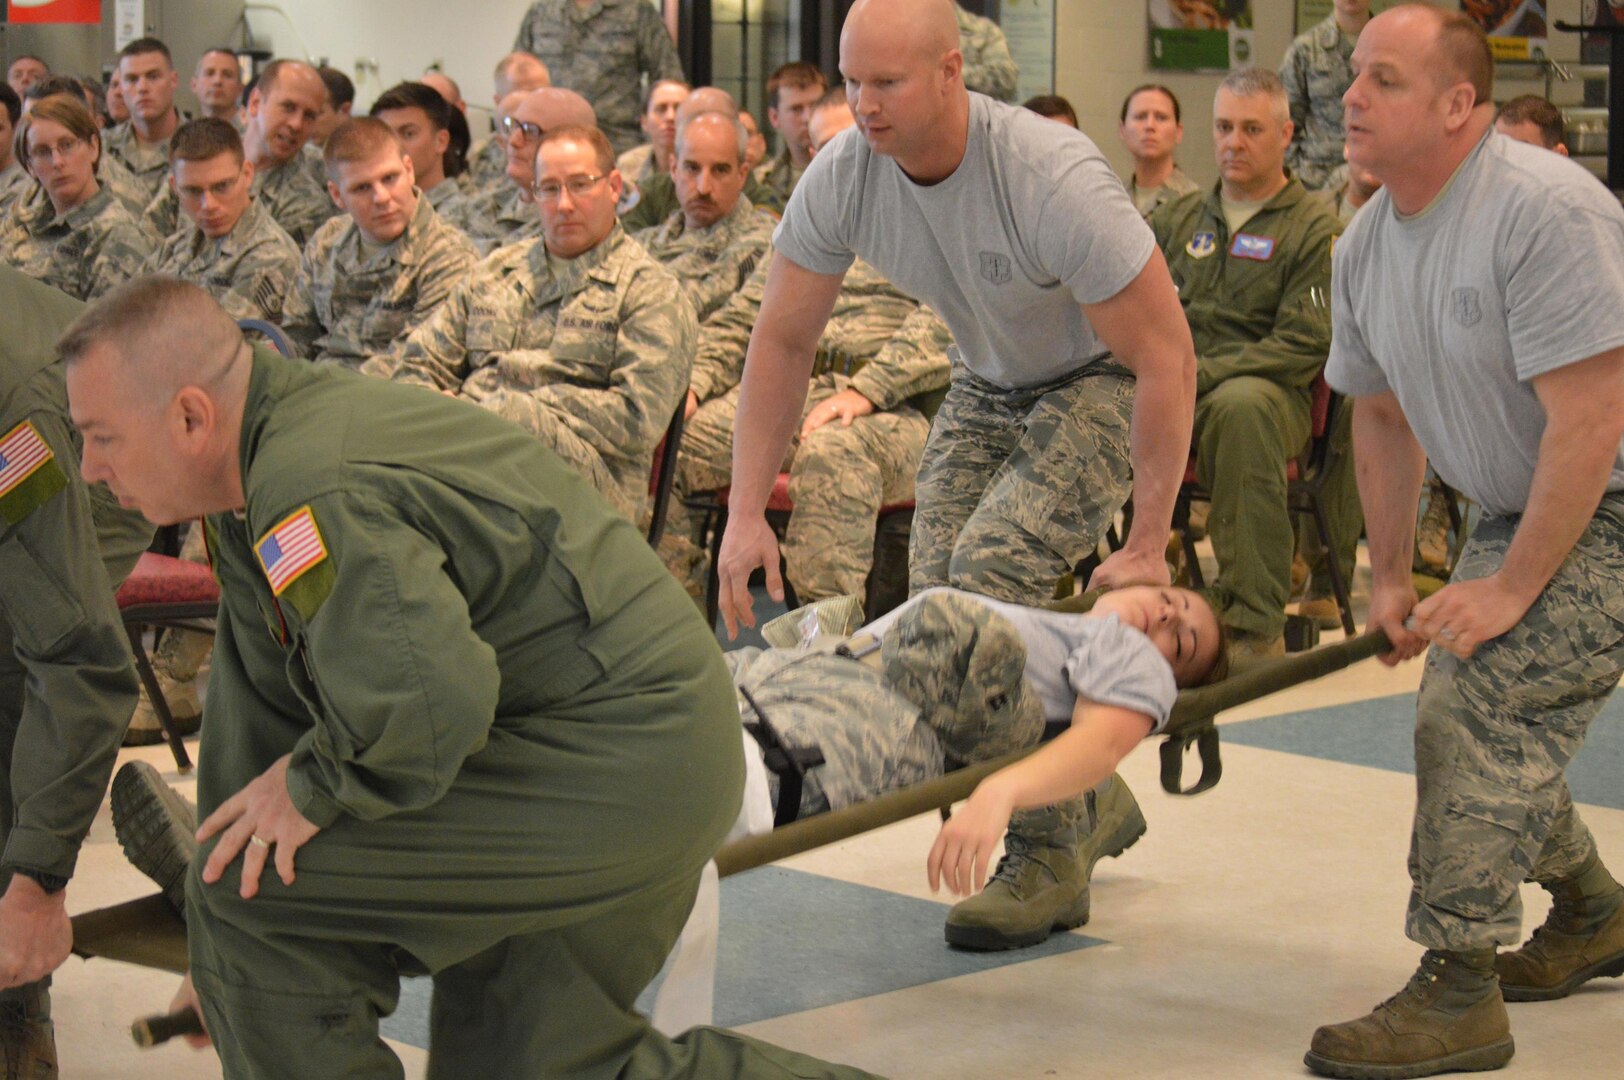 Volunteers demonstrate self-aid buddy care in a combat situation during a briefing as part of the 109th Airlift Wing's first ancillary training rodeo April 18, 2015. More than 200 Airmen went through the training which also included hands-on SABC as well as hands-on chemical, biological, radiological and nuclear training.